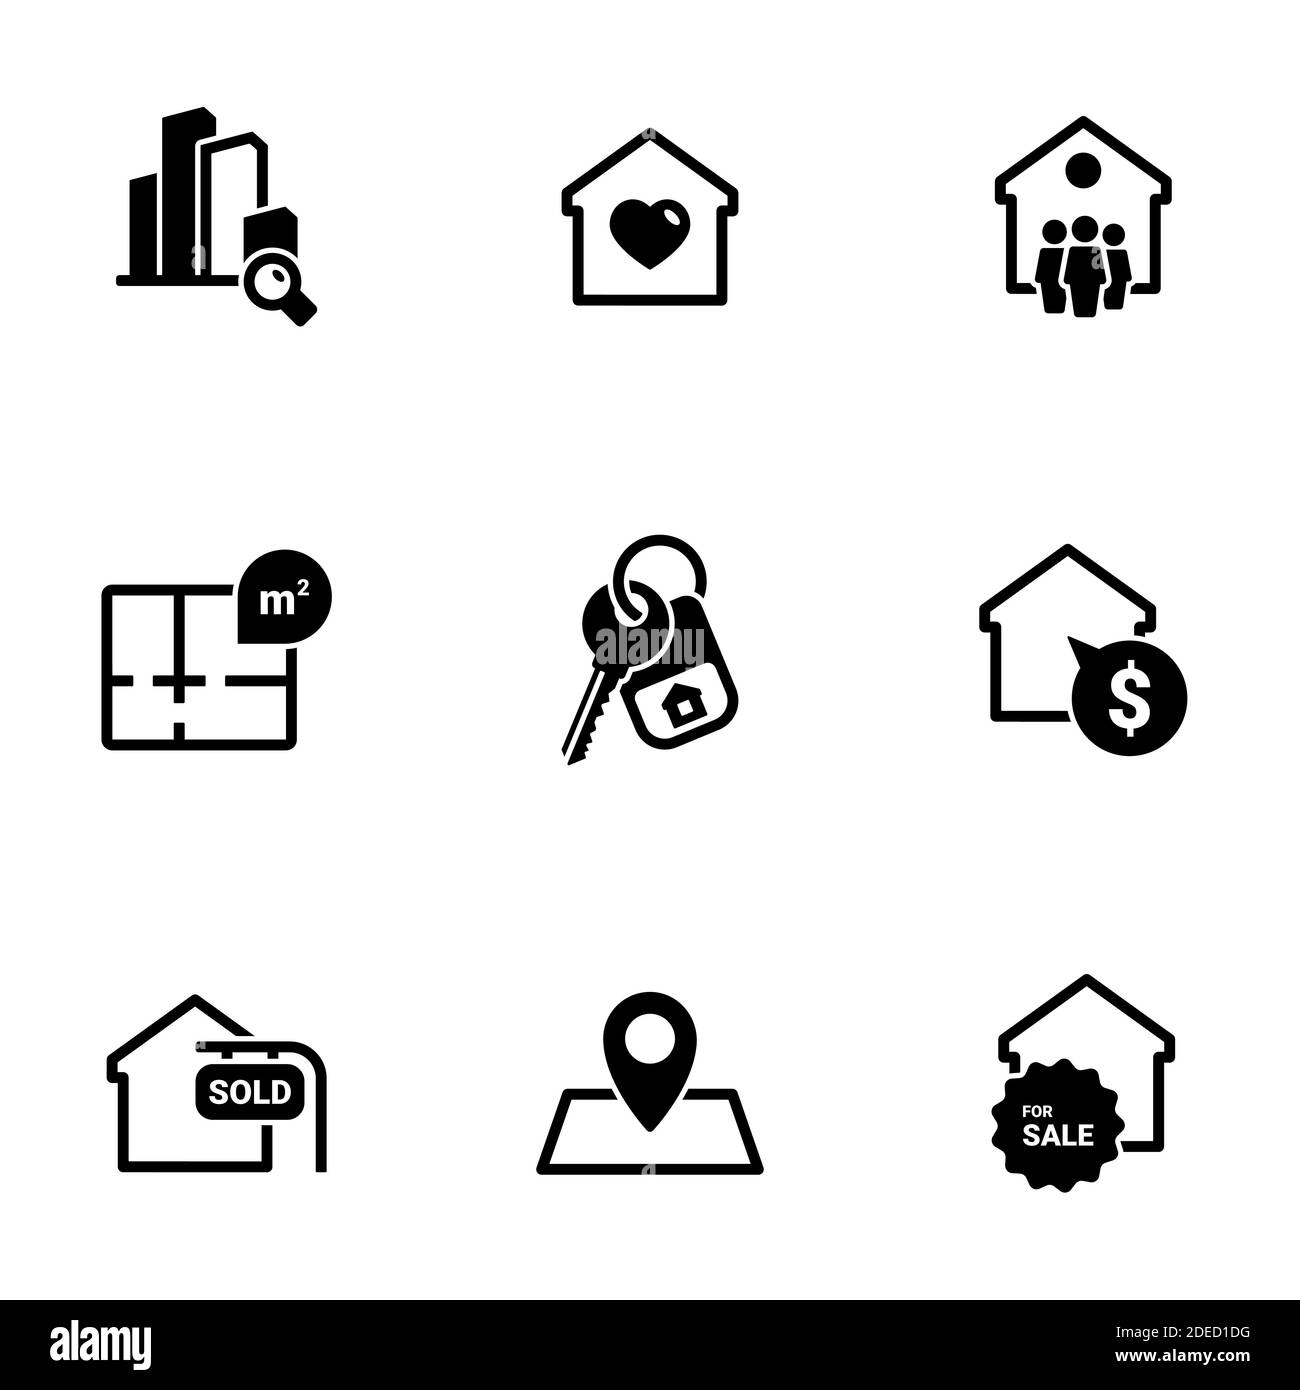 Set of simple icons on a theme Real estate, vector, design, collection, flat, sign, symbol,element, object, illustration, isolated. White background Stock Vector